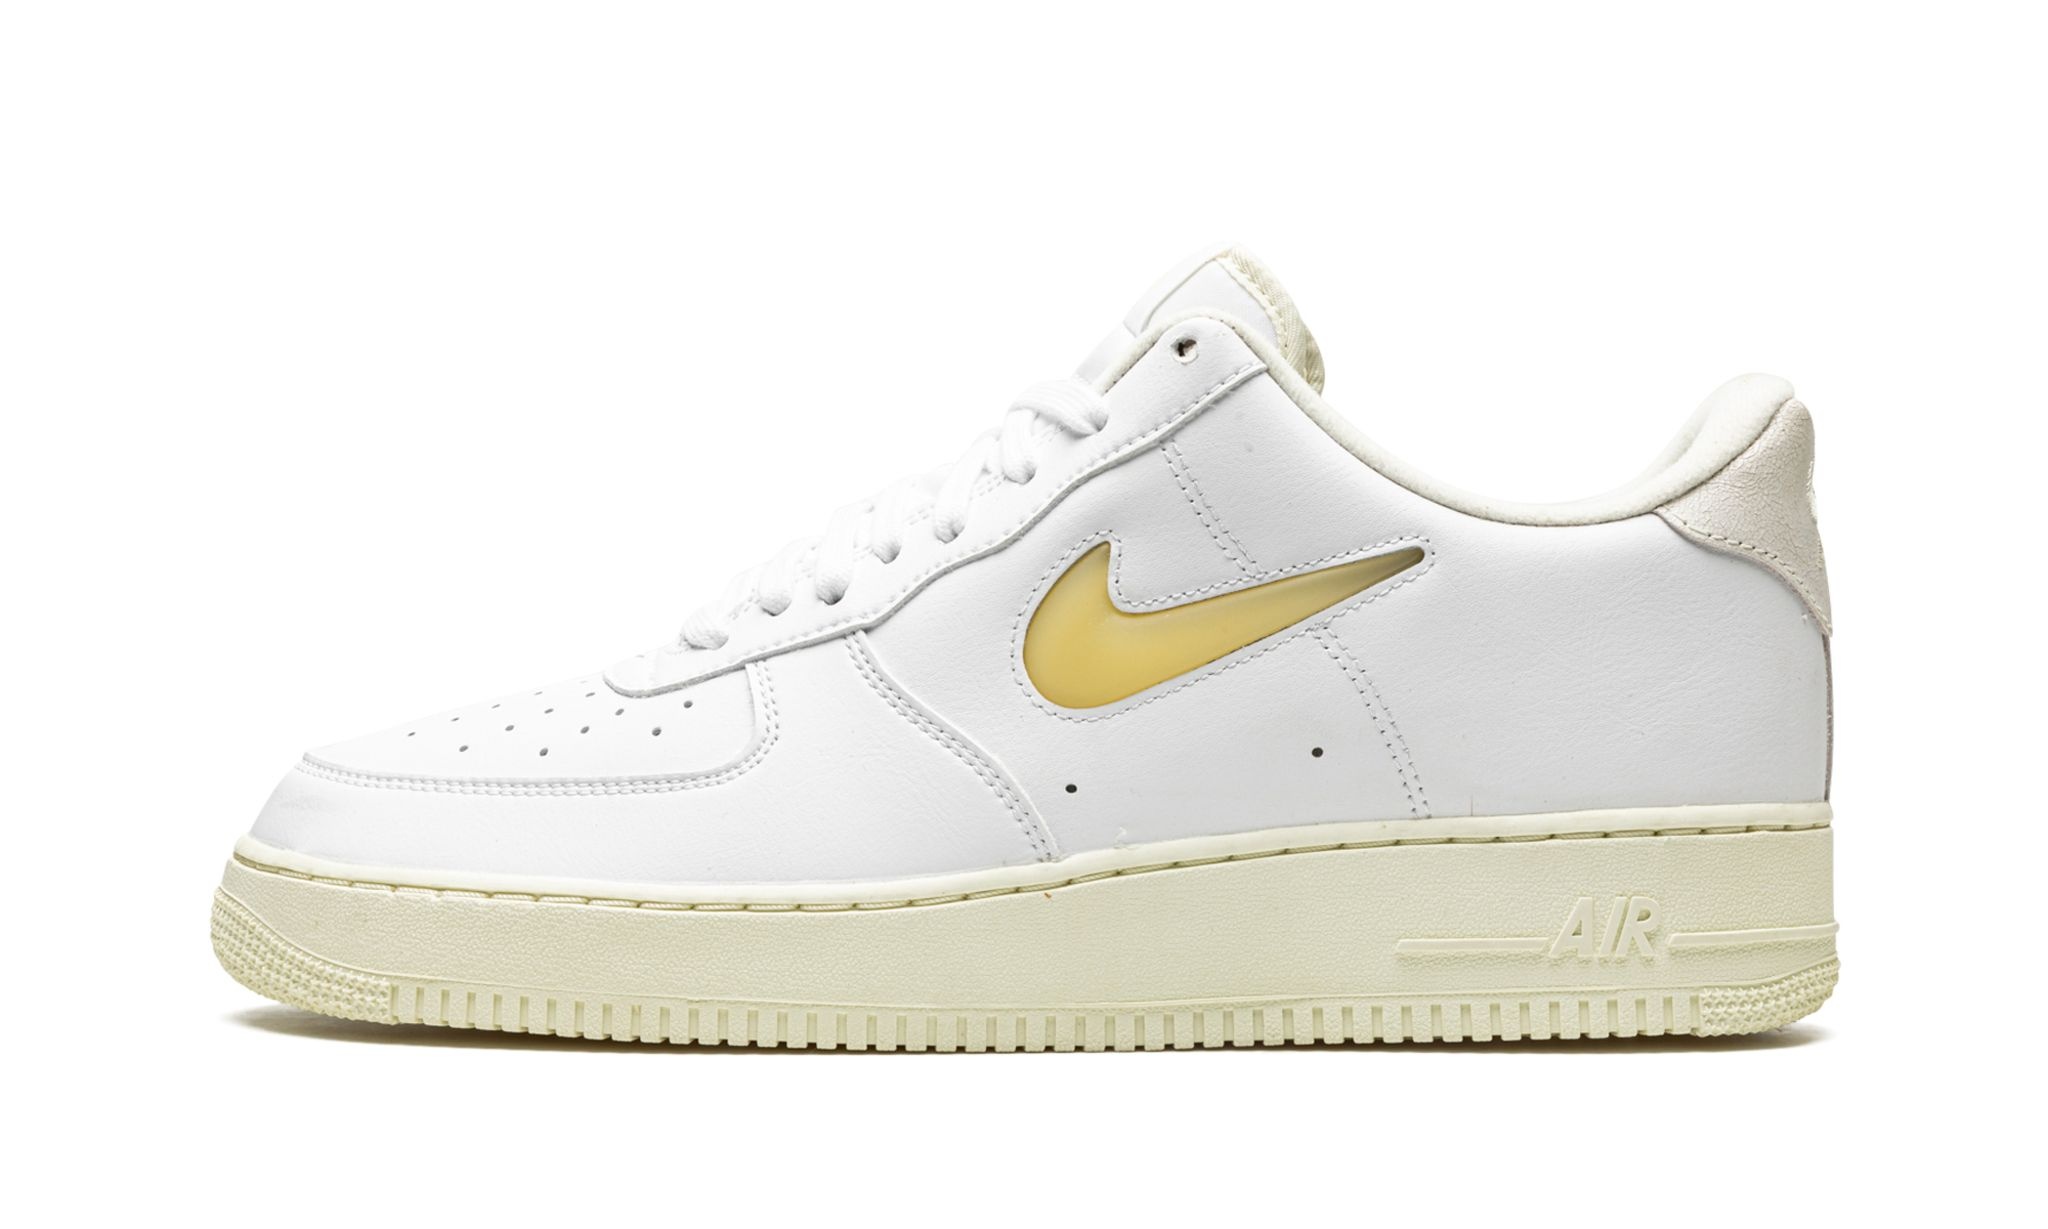 Air Force 1 Low Jewel "White/Pale Vanilla" - 1